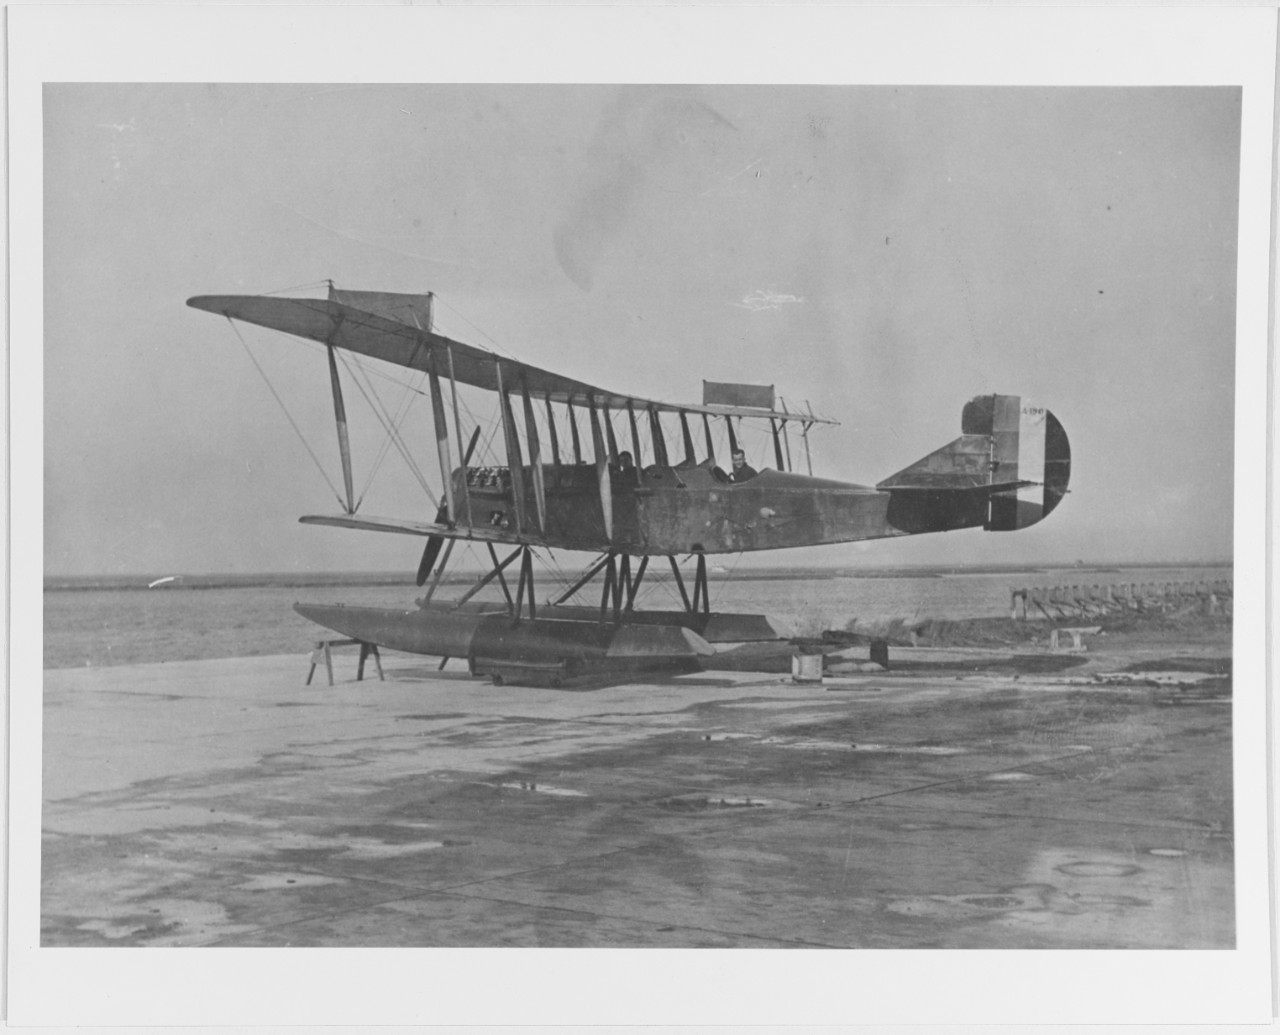 Curtiss R-6 (Buno A-190) at Naval Air Station, Cape May